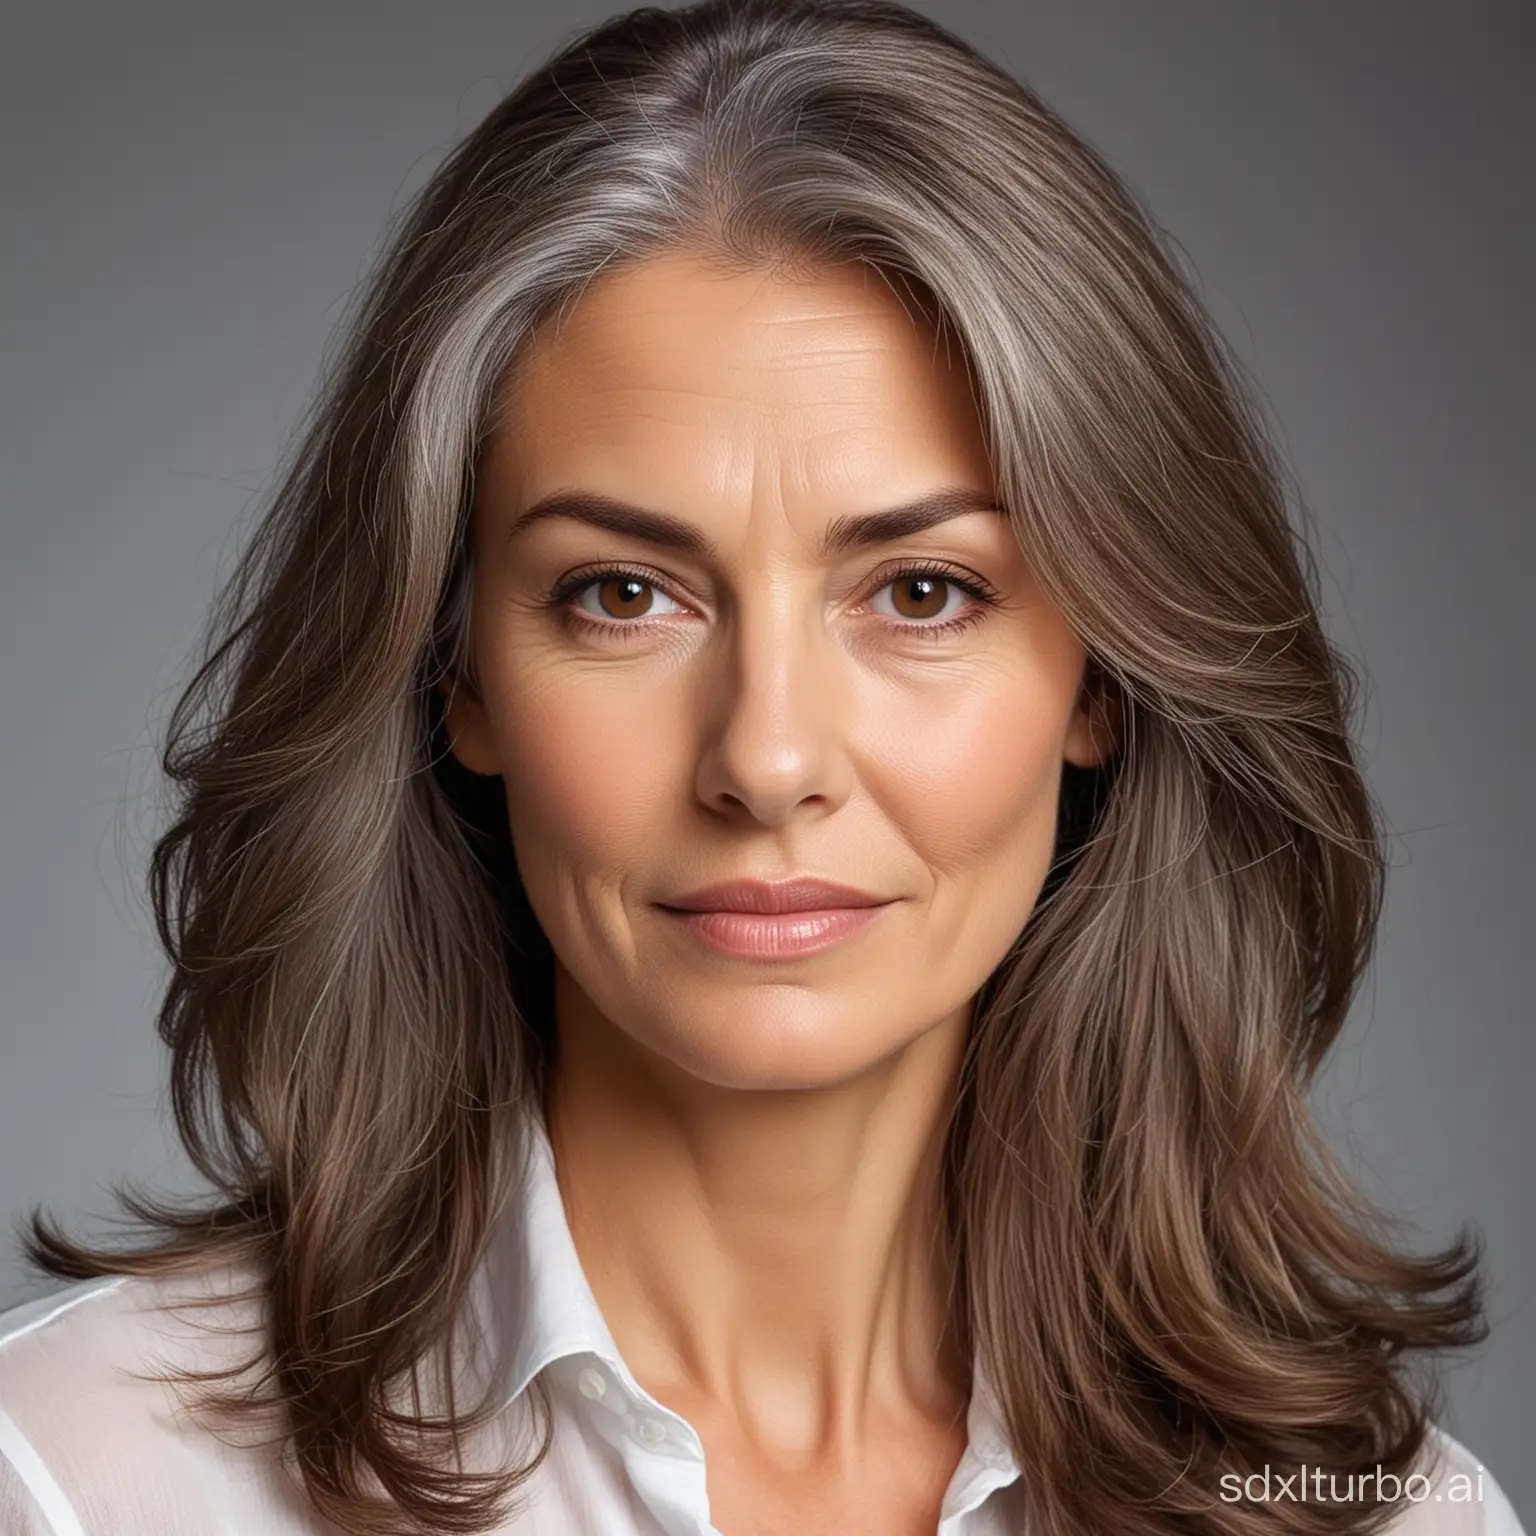 Create an image of a woman with long, brown hair, slim, with a good appearance, with a lot of gray hair, 1.70 meters tall, who seems to have been a model, with dark hazel eyes, with wrinkles around the eyes, about 65 years old, and does not appear to have had surgery, of American nationality, resembling Andi MacDowell.